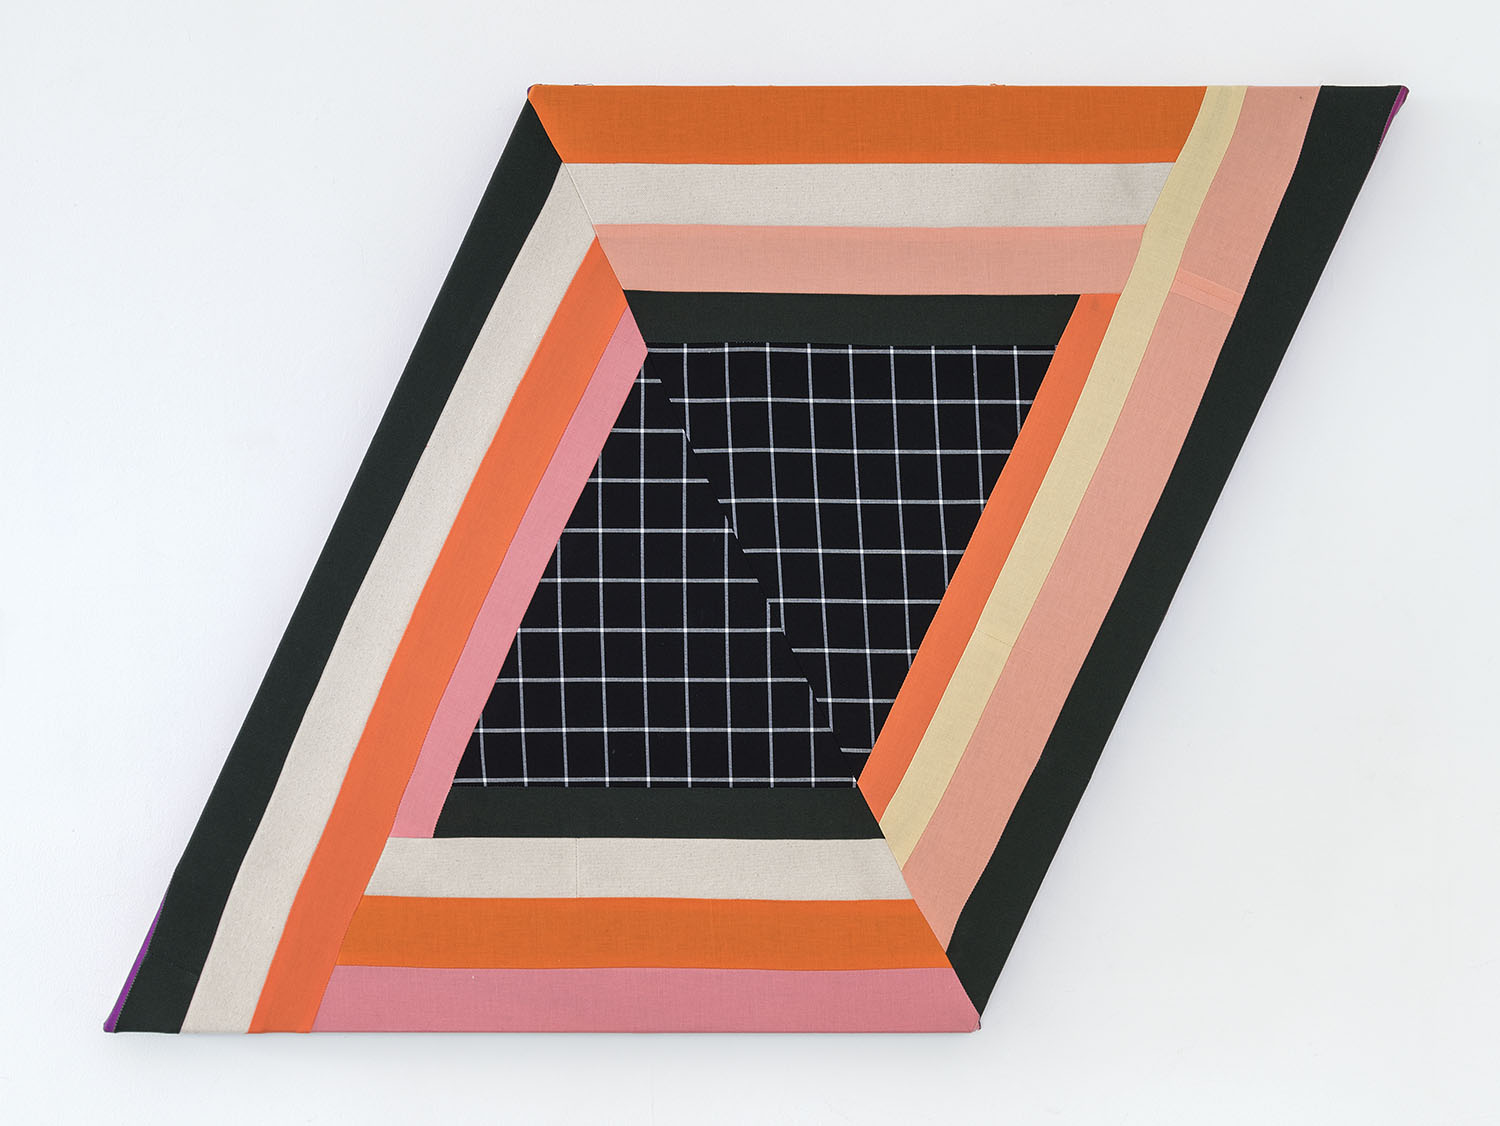    Fruit Machine   ,  2019 Sewn cotton and canvas on shaped support 25 x 34.5 inches overall (63.5 x 87.6 cm overall) 